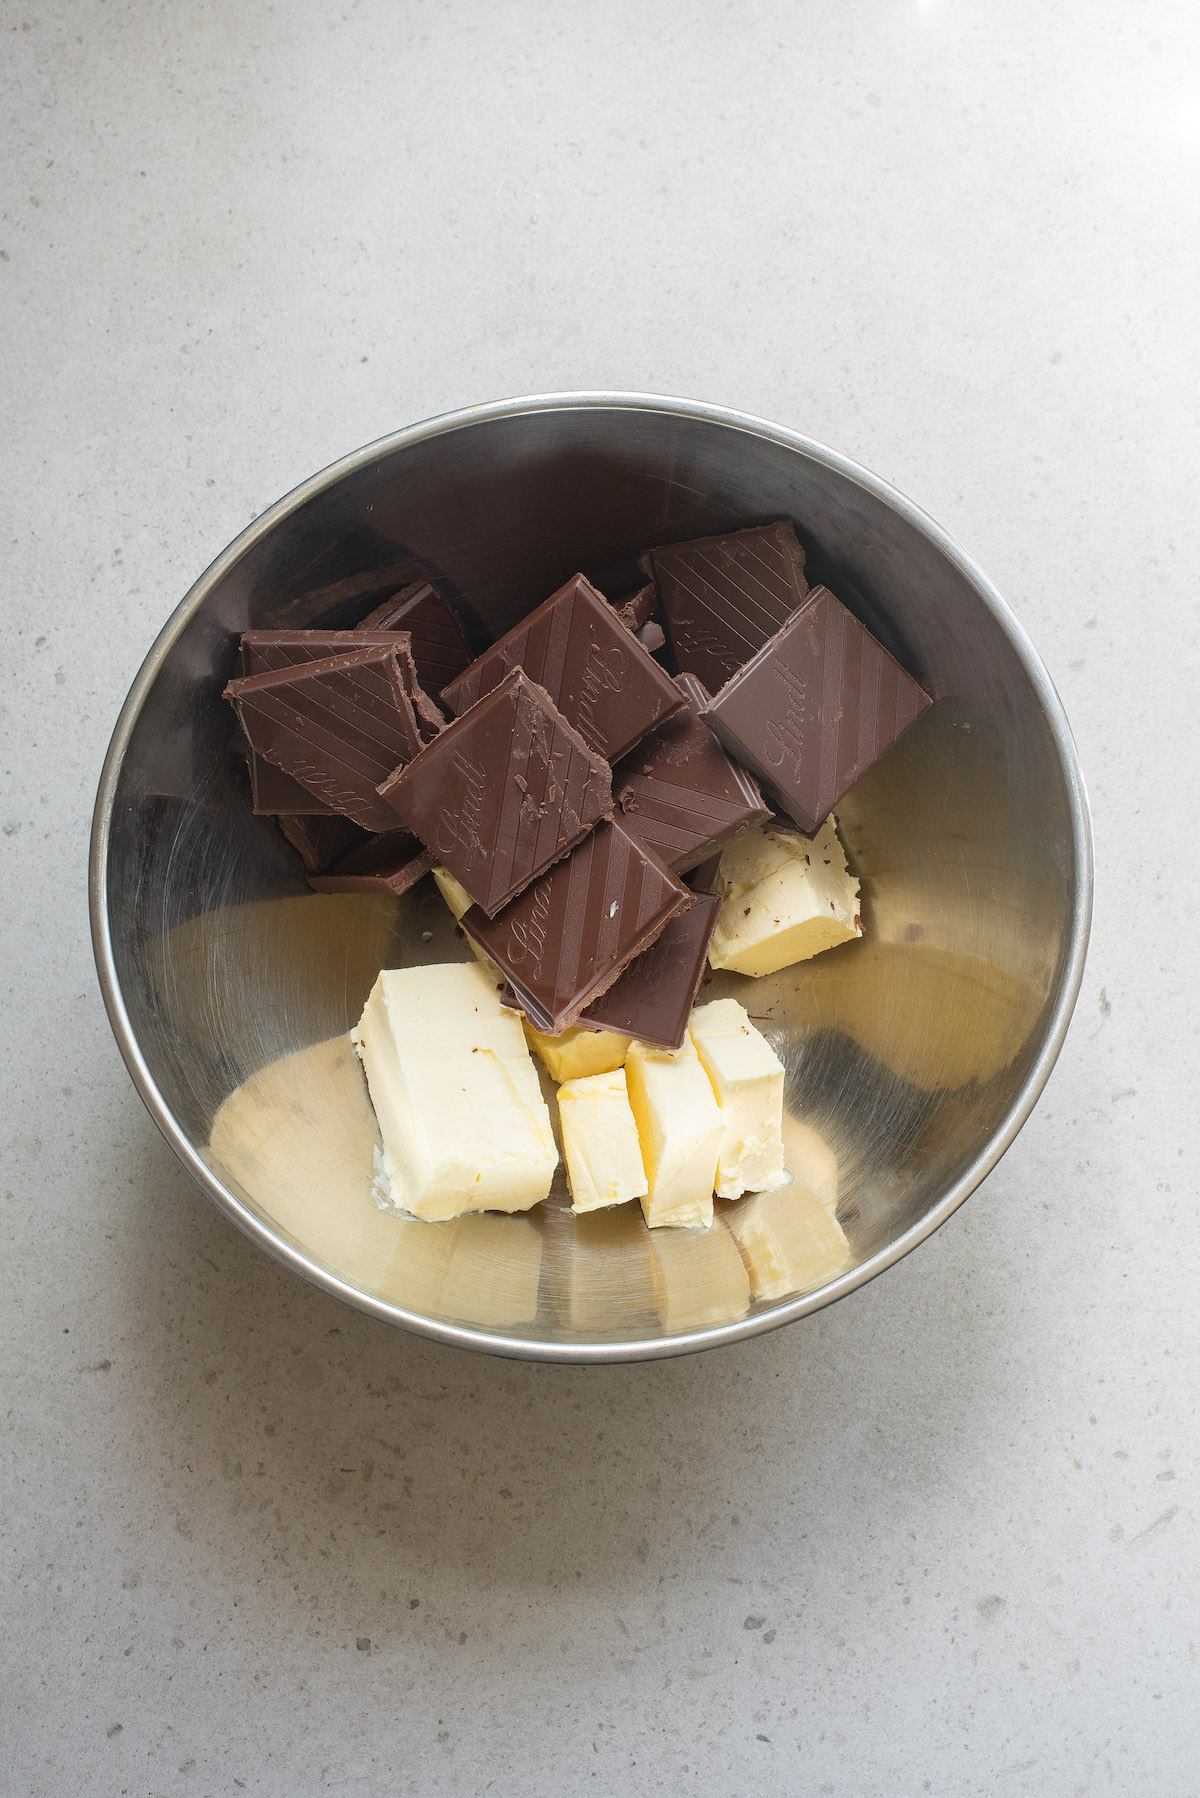 combining butter and chocolate is the first step for making this recipe